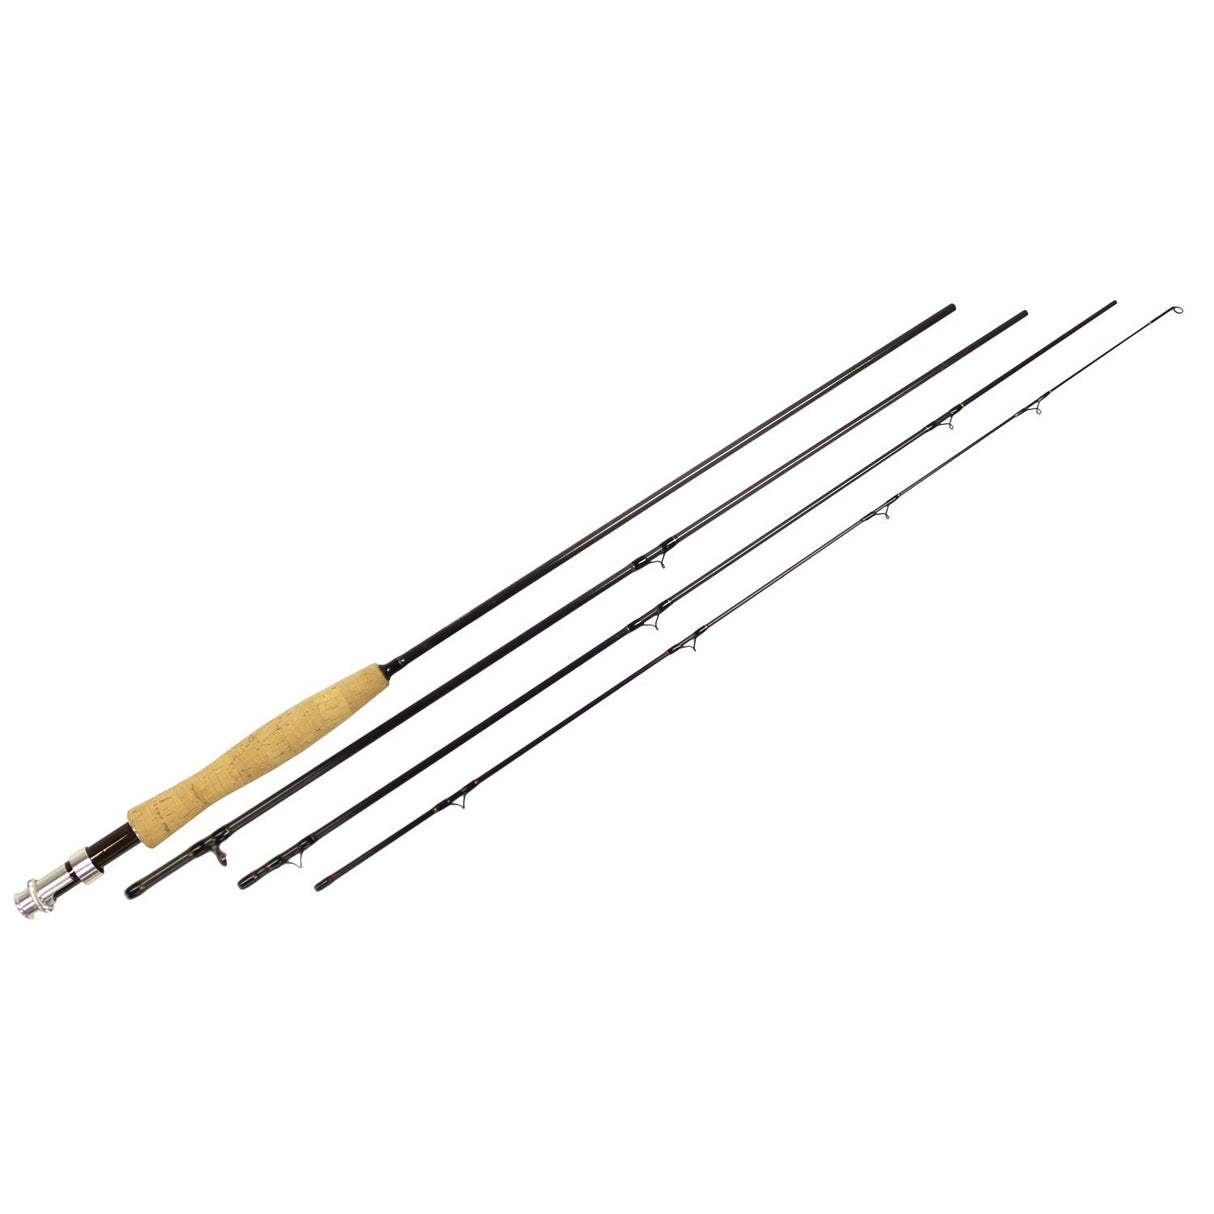 SHU-FLY 9'0" 4-PIECE FLY ROD FOR 4 WEIGHT